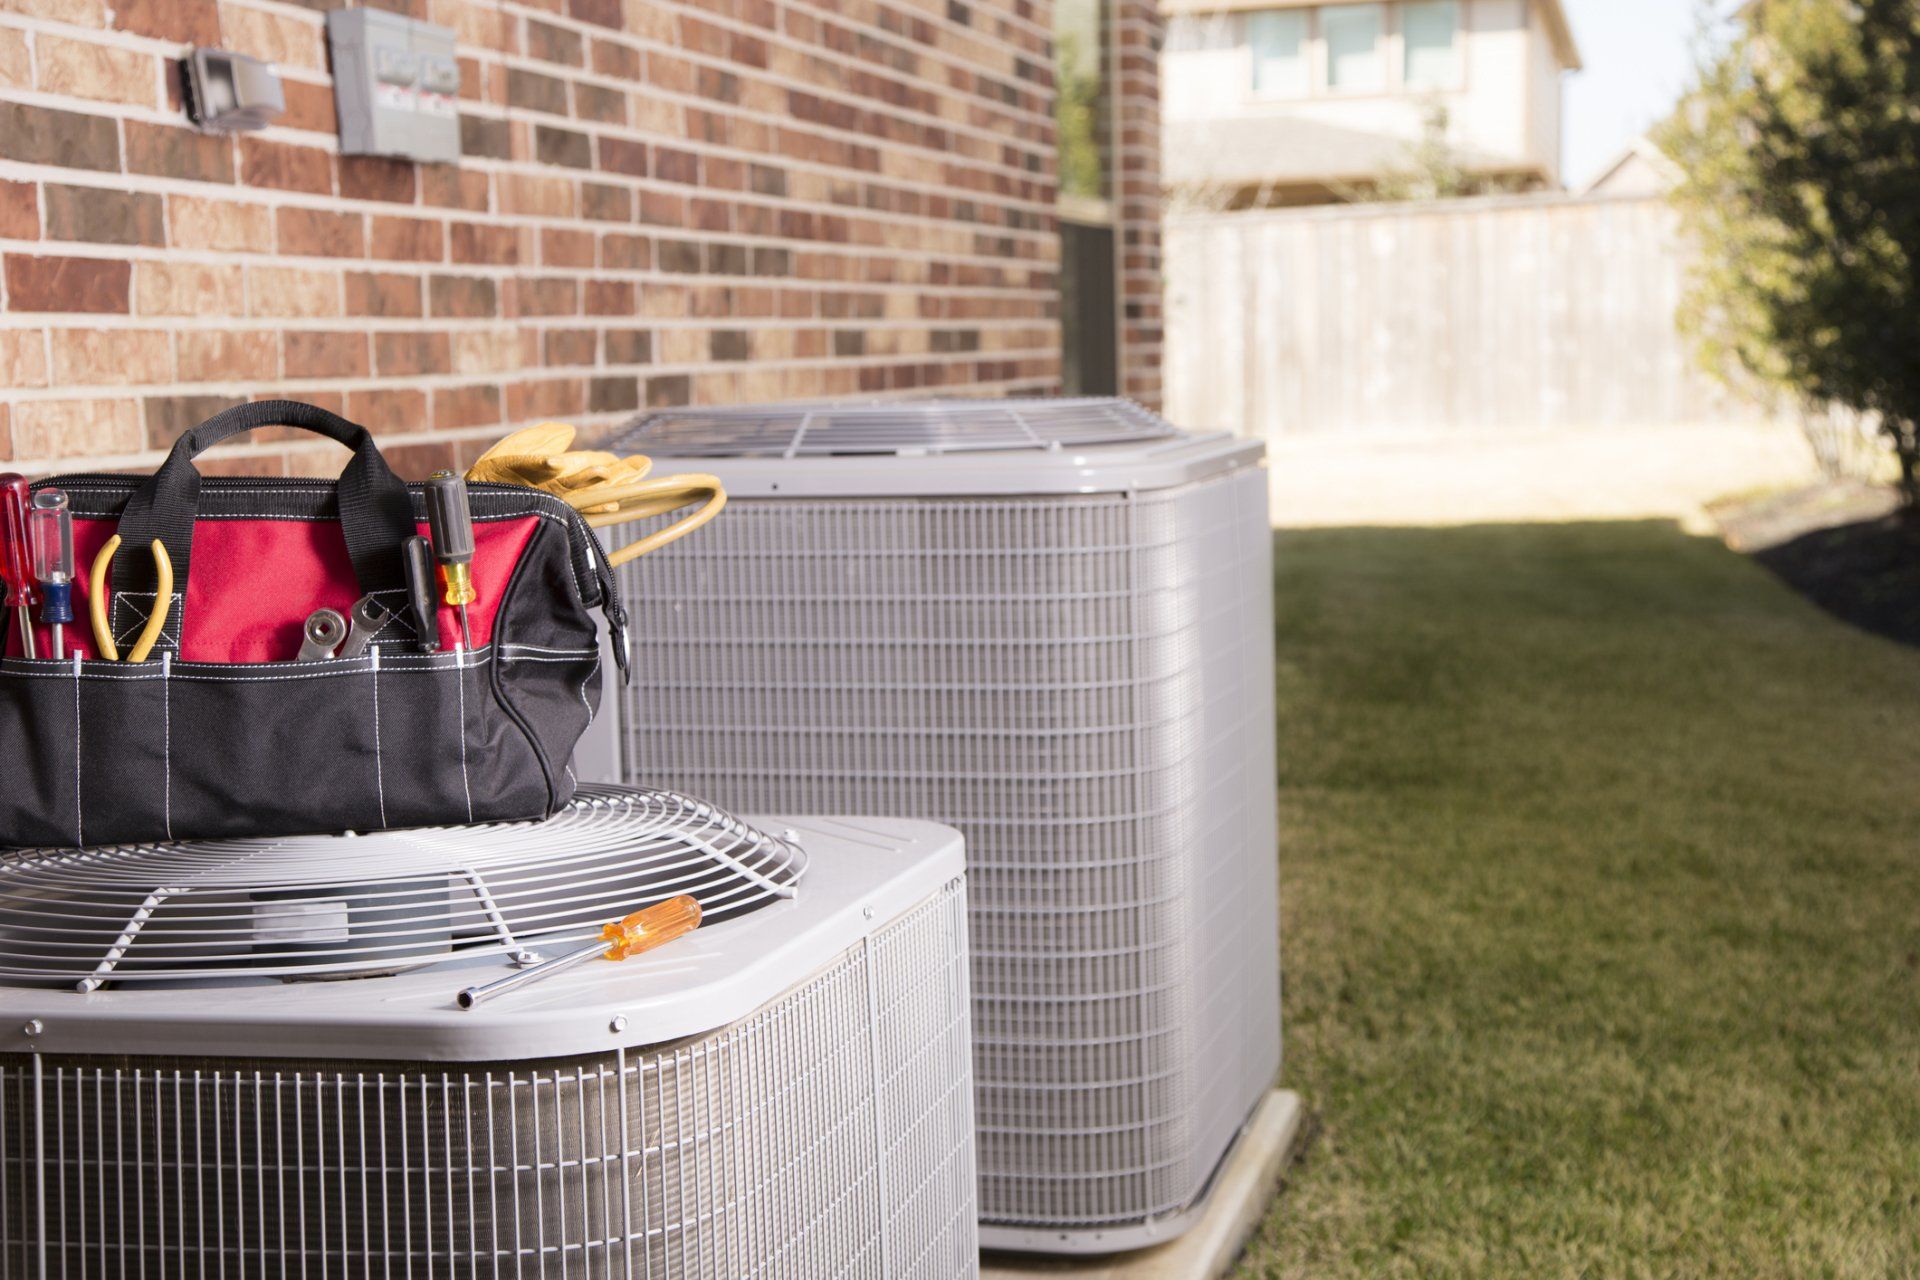 An HVAC system and repair tools | residential and commercial service agreements